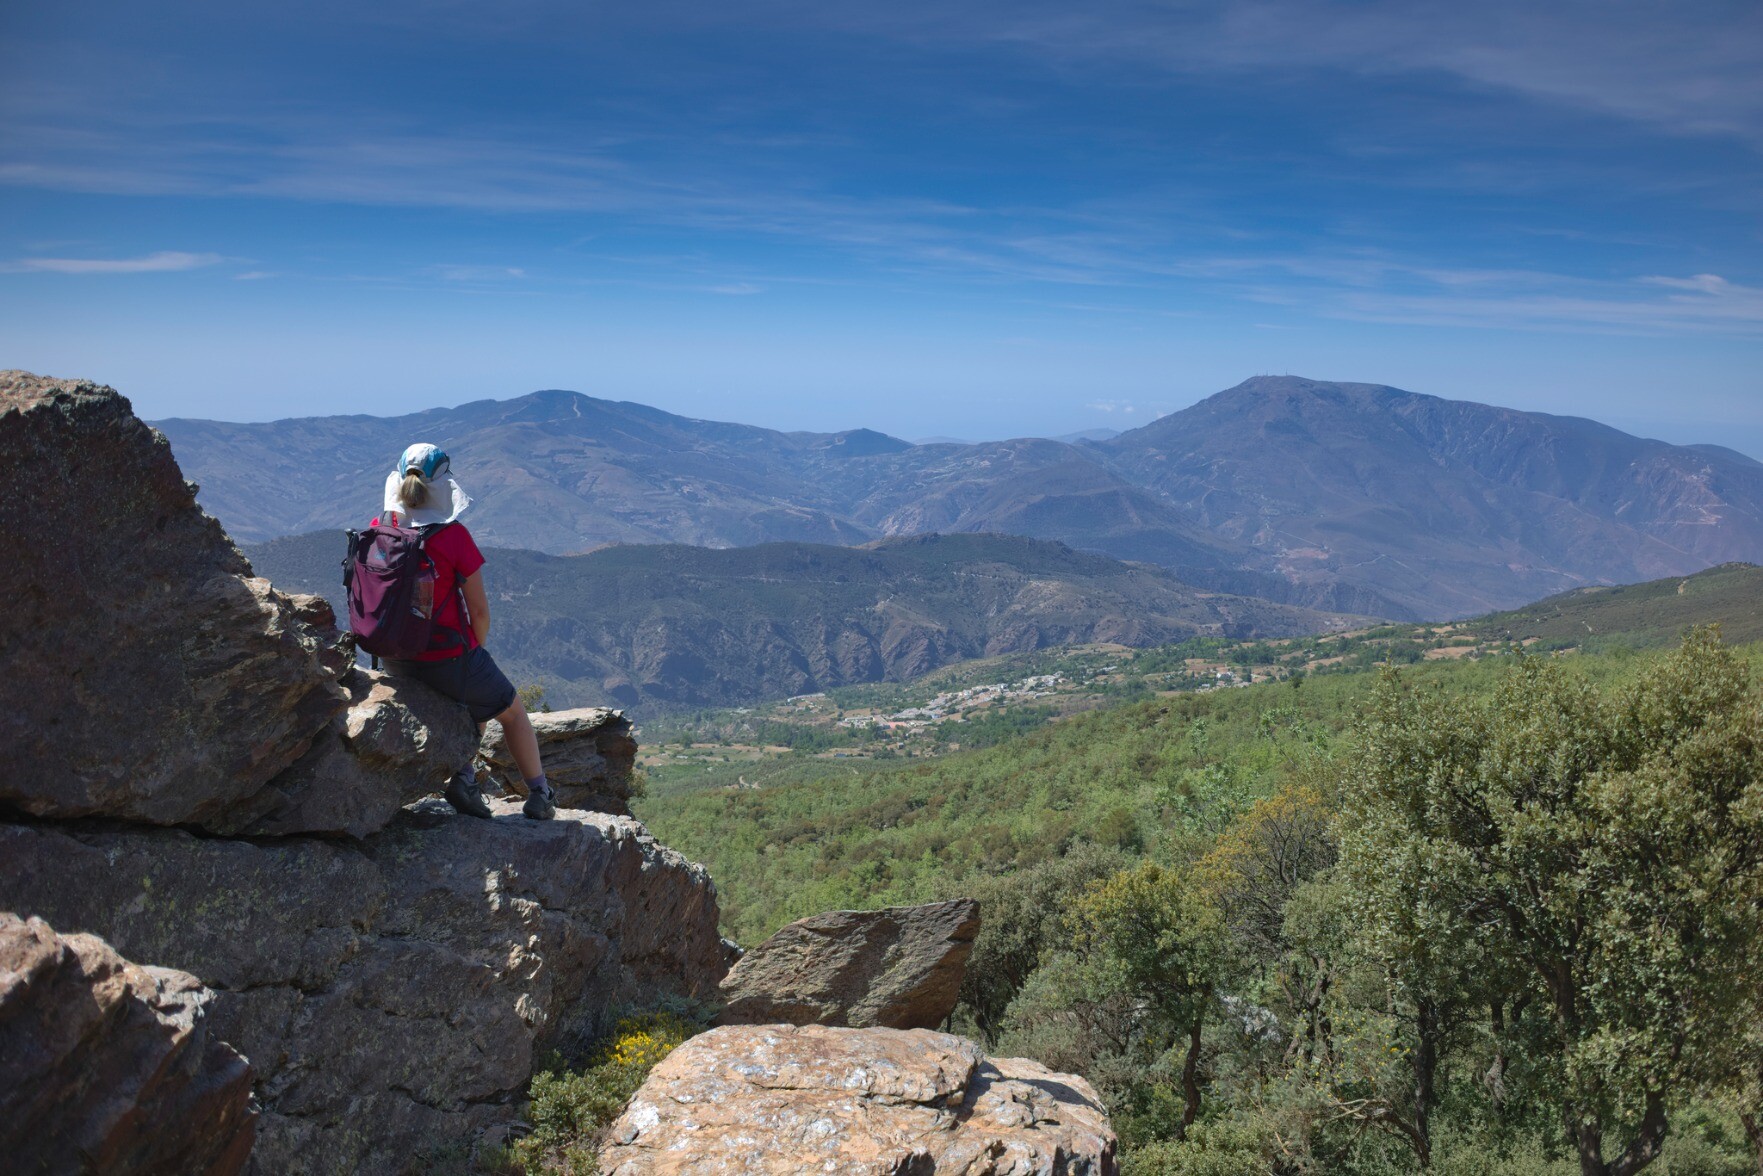 A person sits on a rocky outcrop looking at the view of forests, mountains and blue sky